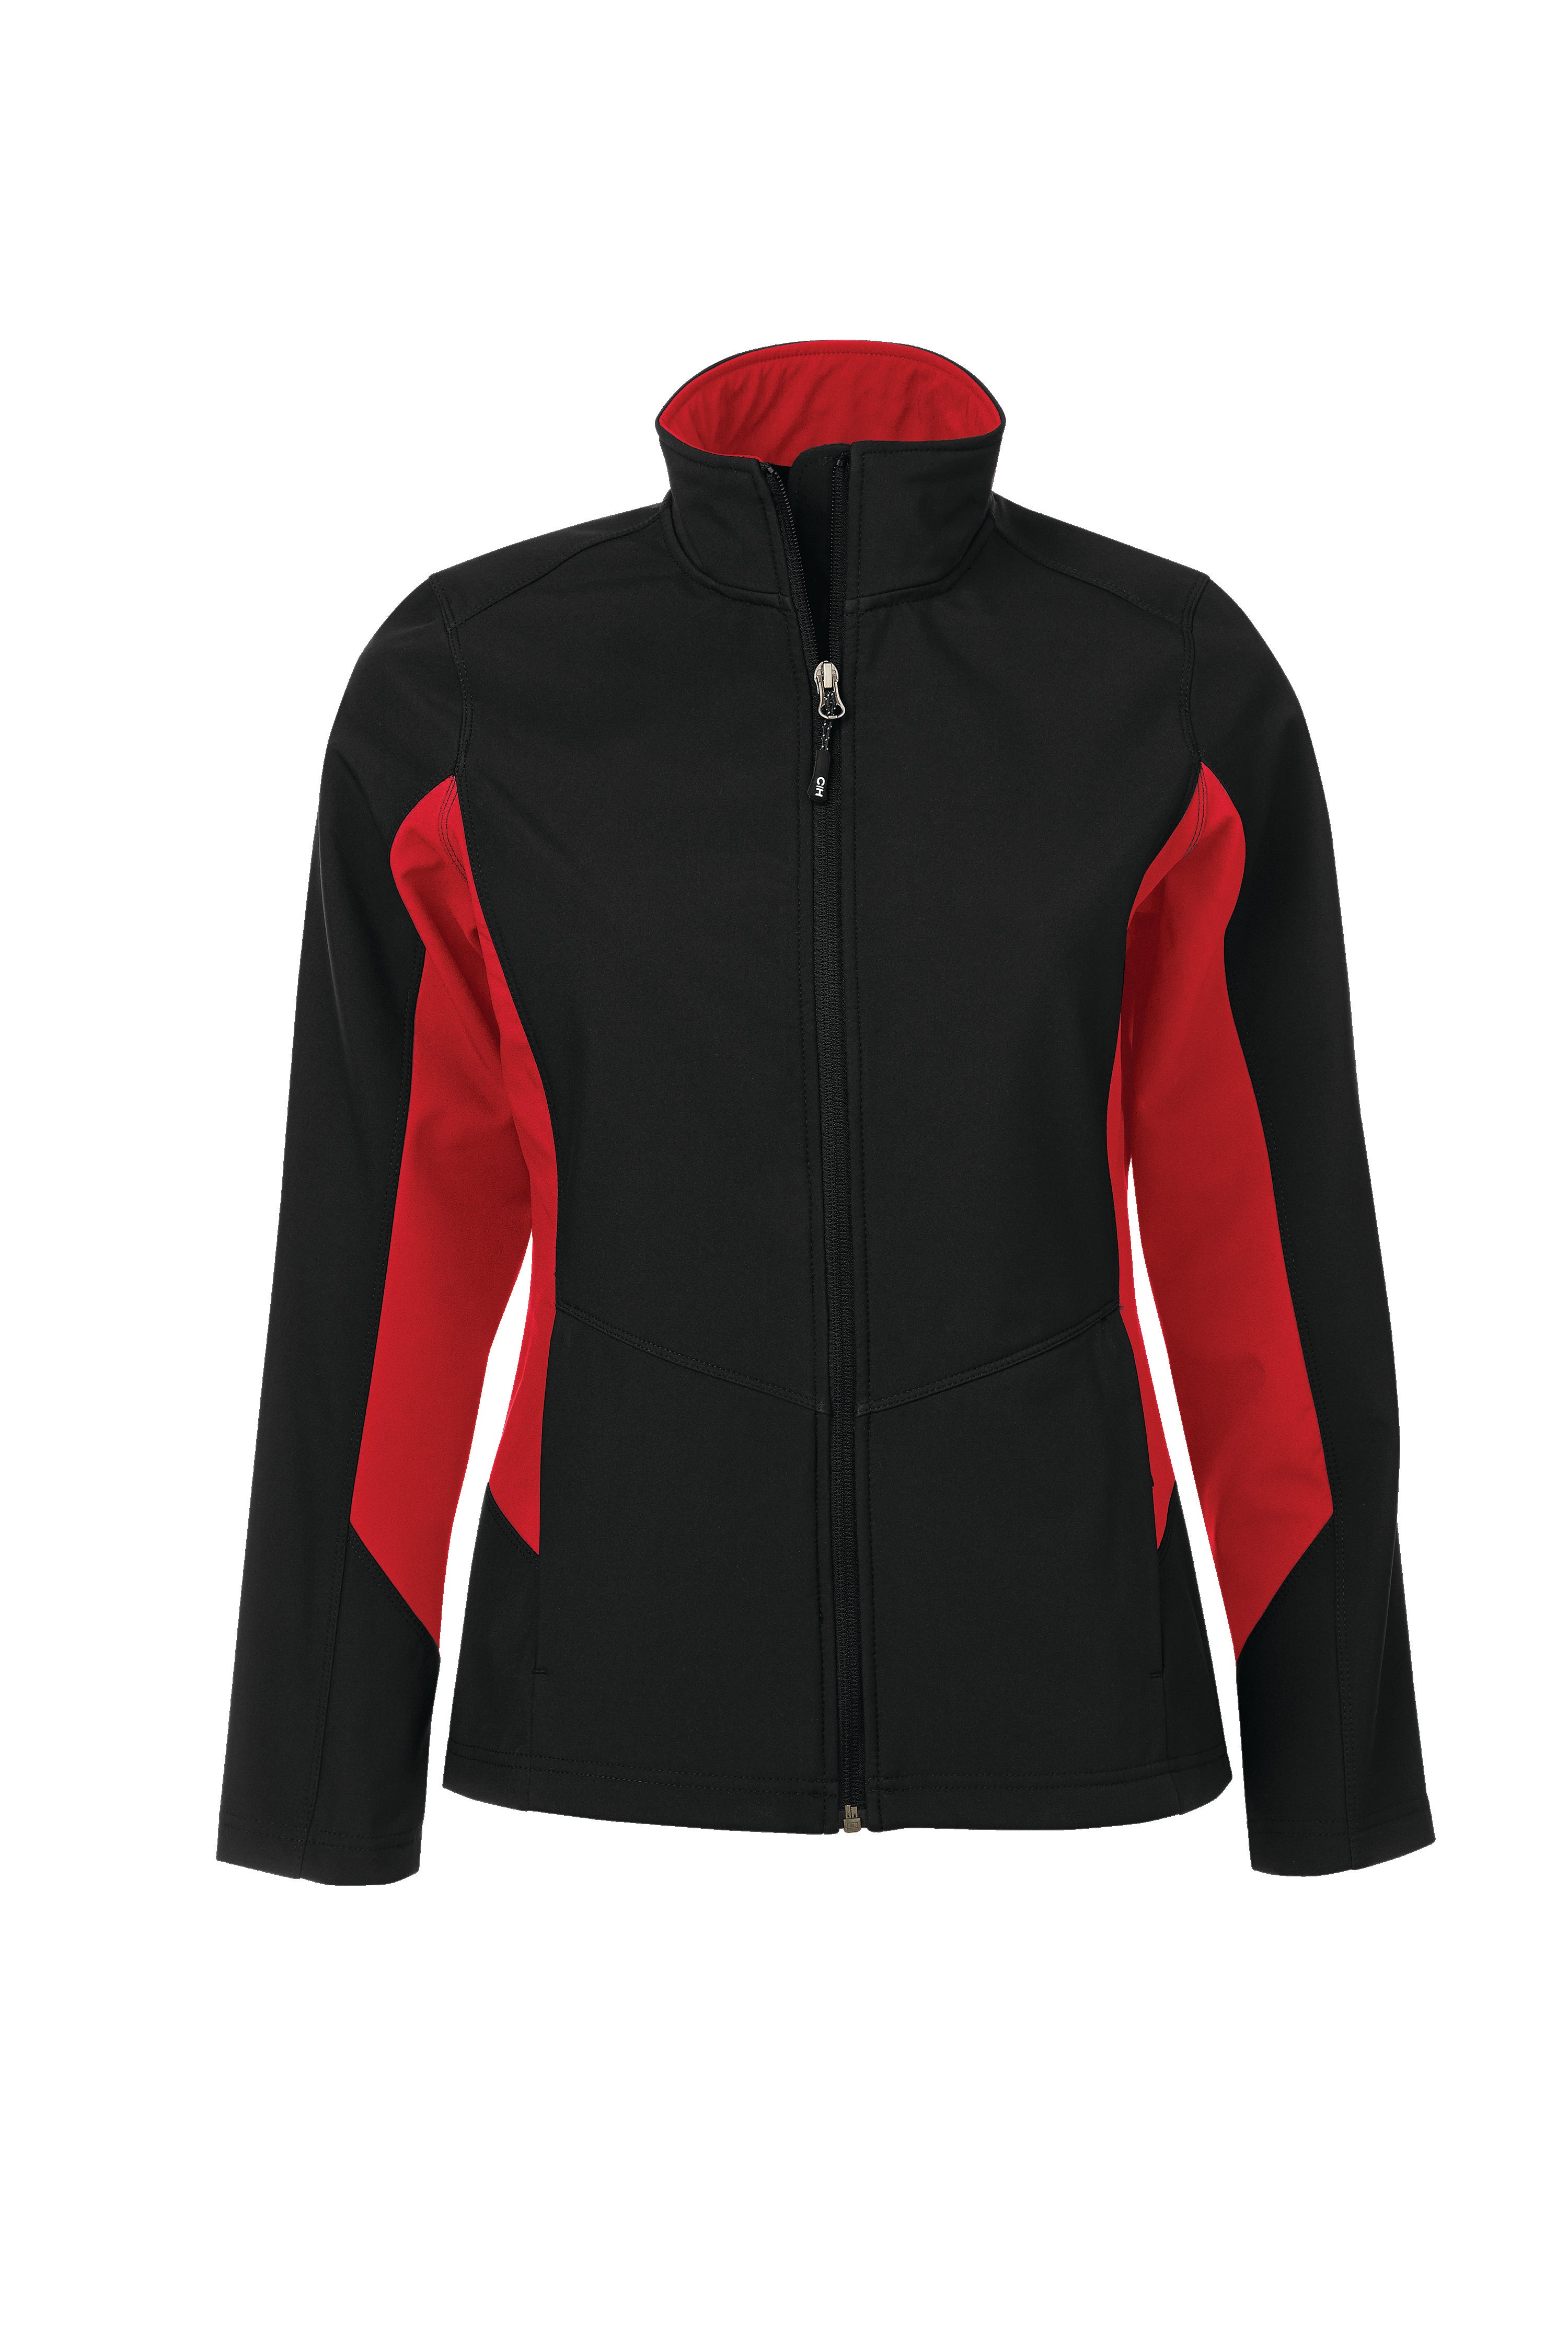 COAL HARBOUR® EVERYDAY WATER REPELLENT SOFT SHELL LADIES' JACKET. L7603